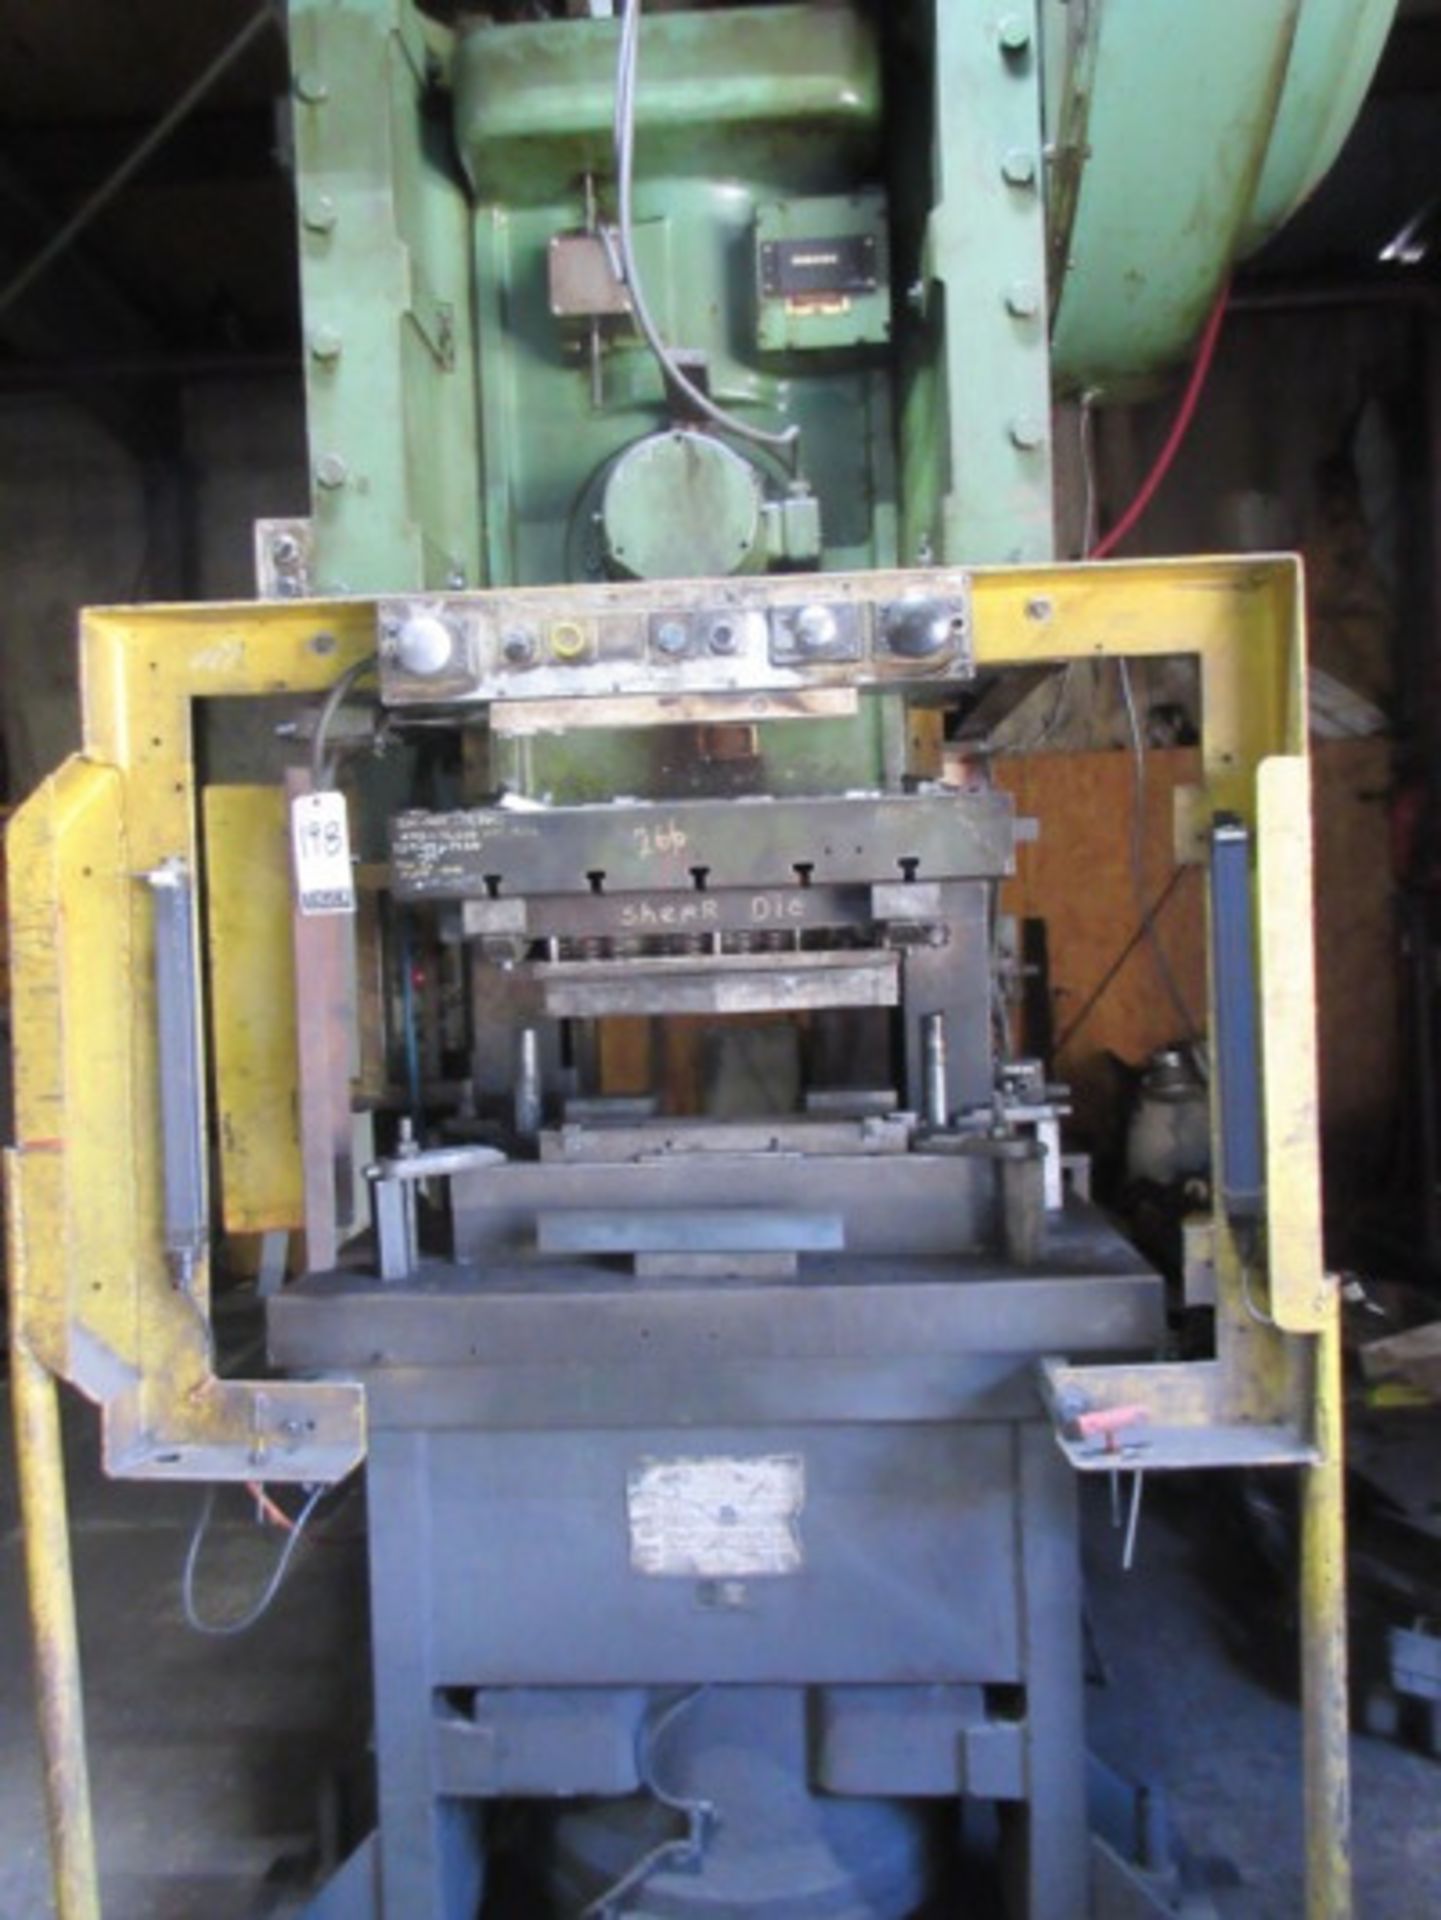 Minster Straight Sided 150 Ton Press, M/N- G1-150, S/N- G1-150-21854 - Lot Location: Saw Room - Site - Image 3 of 4